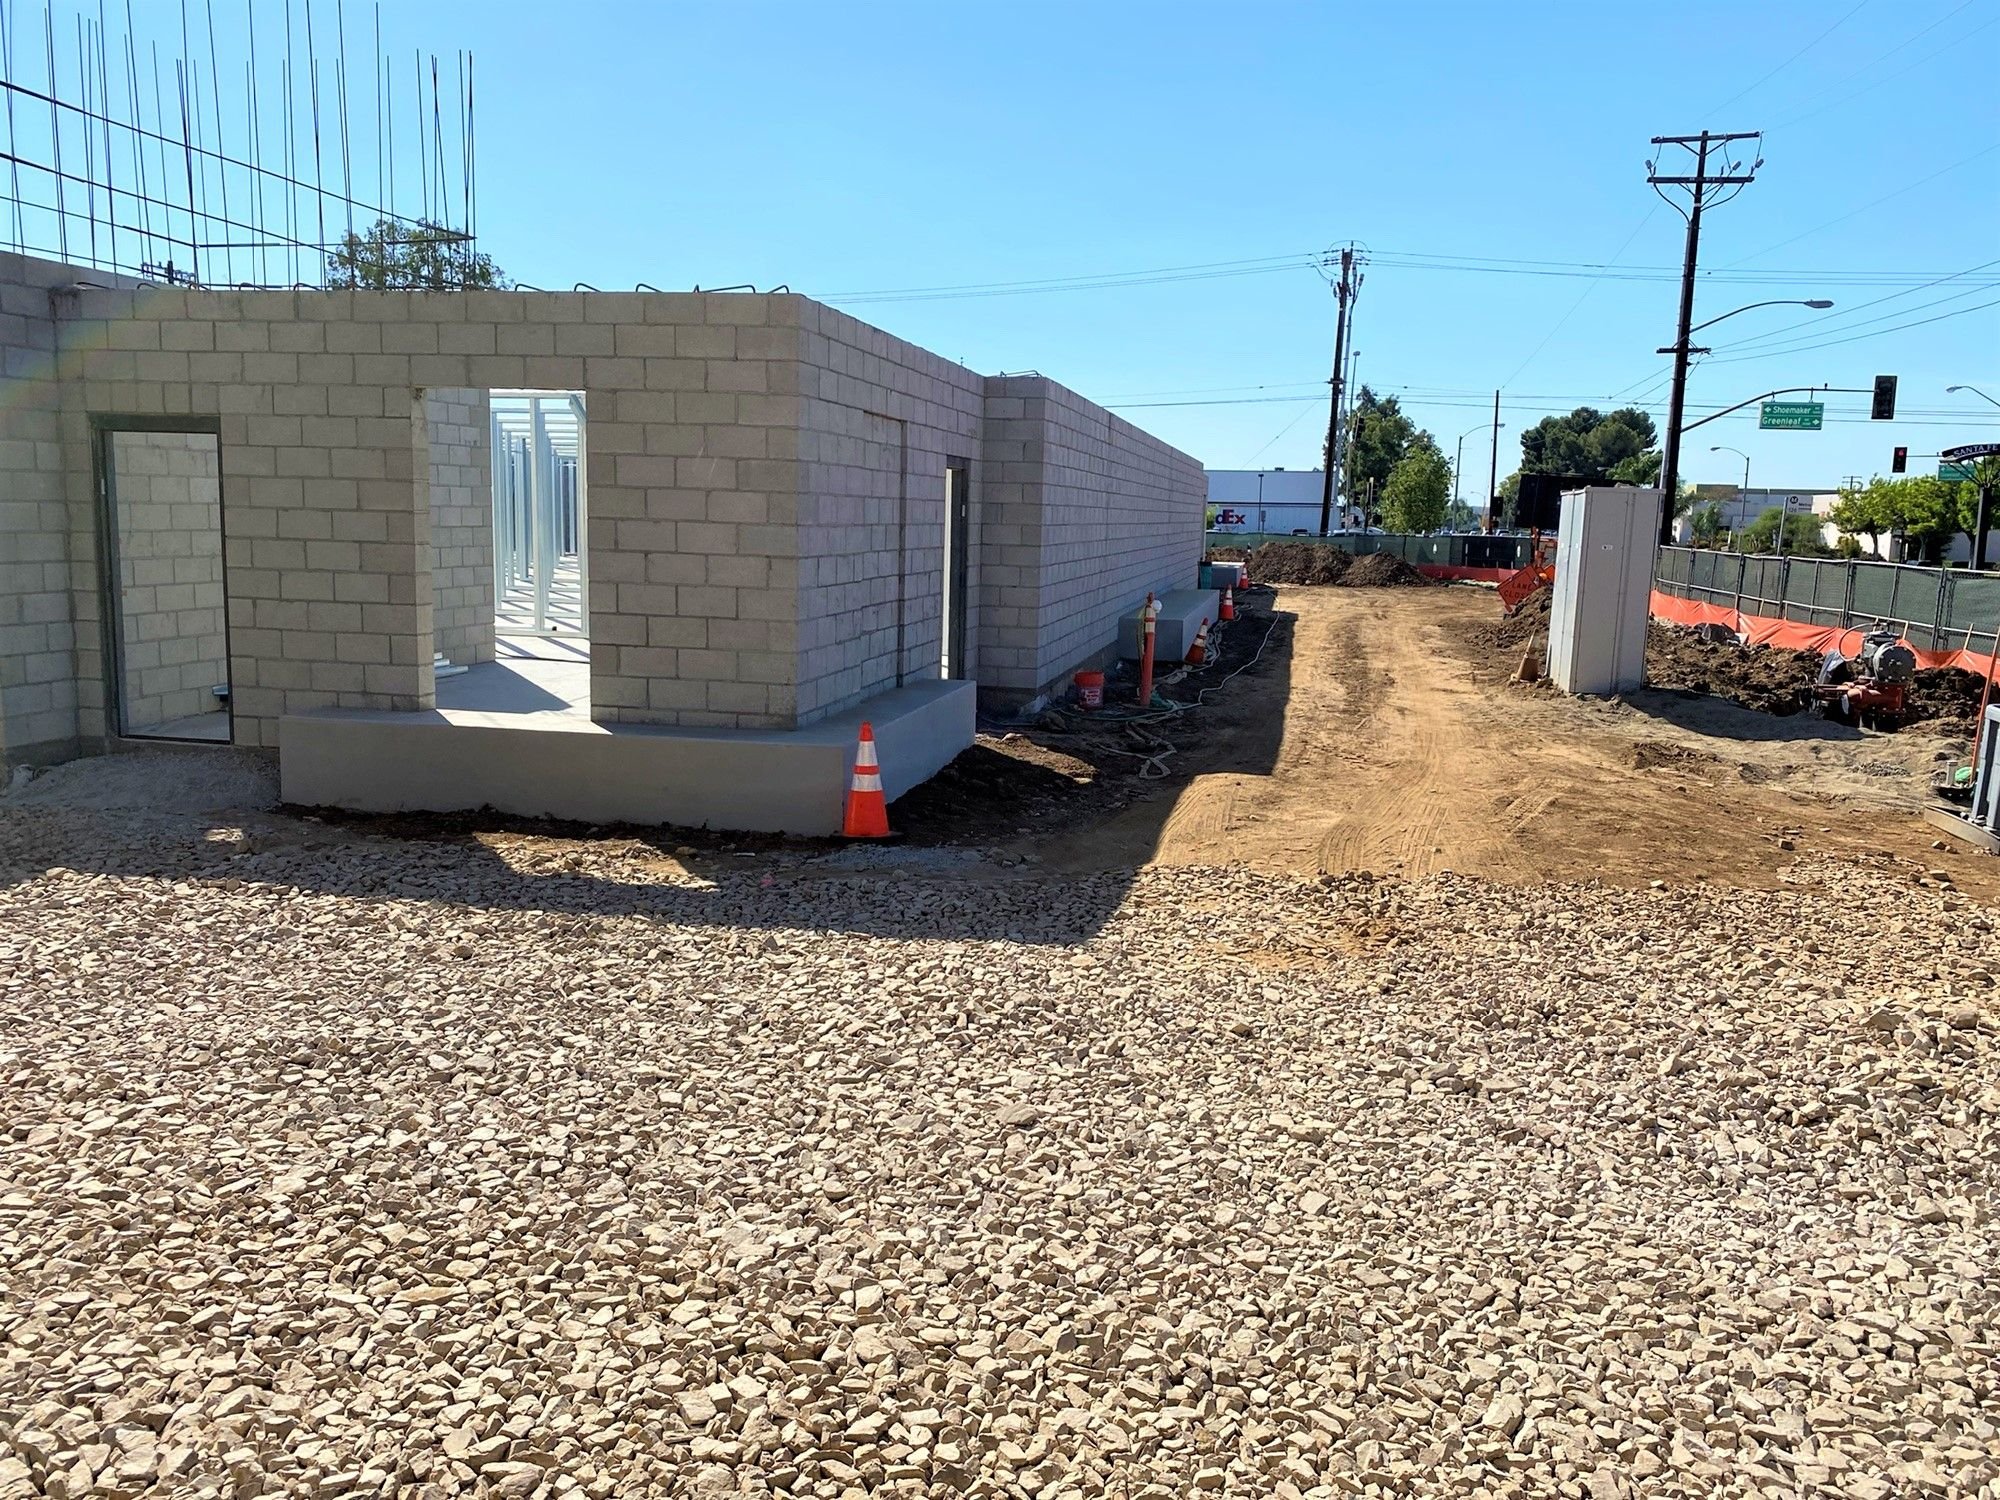 DAI Our Work Current Projects Golden State Storage – Santa Fe September 2022 2.jpg